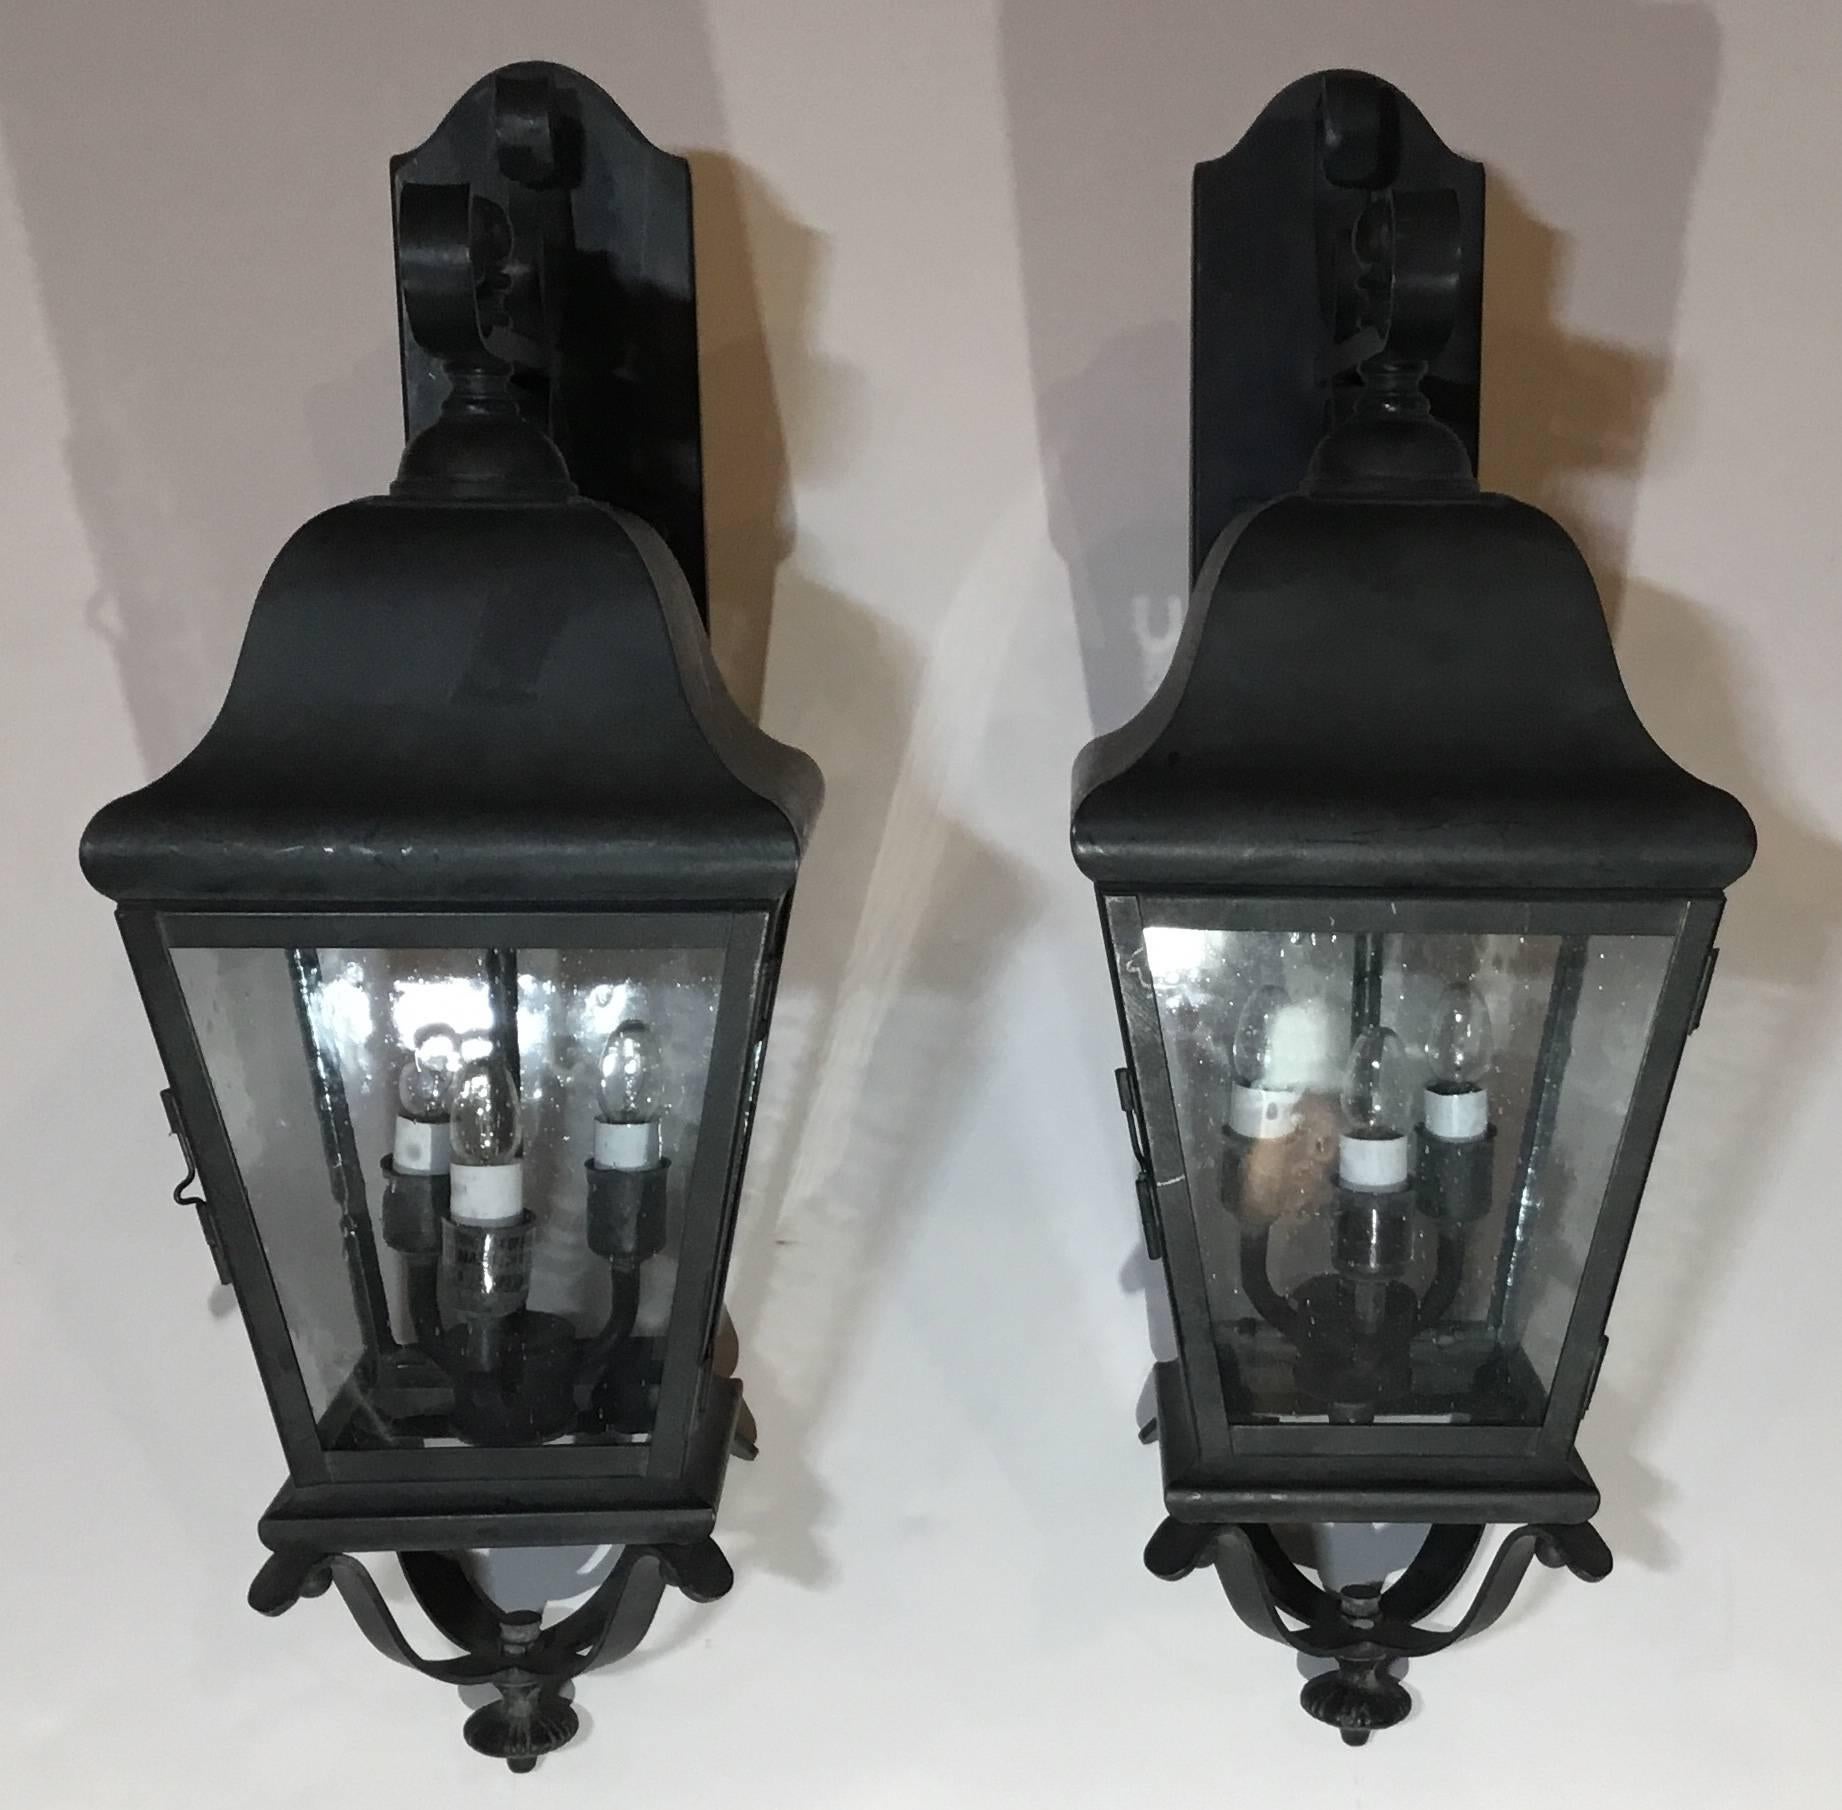 Impressive pair of lanterns handcrafted from solid brass, electrified with cluster of 3 40/watt lights each ready to hang in any great entrance . Seeded glass,UL approved up to US code suitable for wet locations.